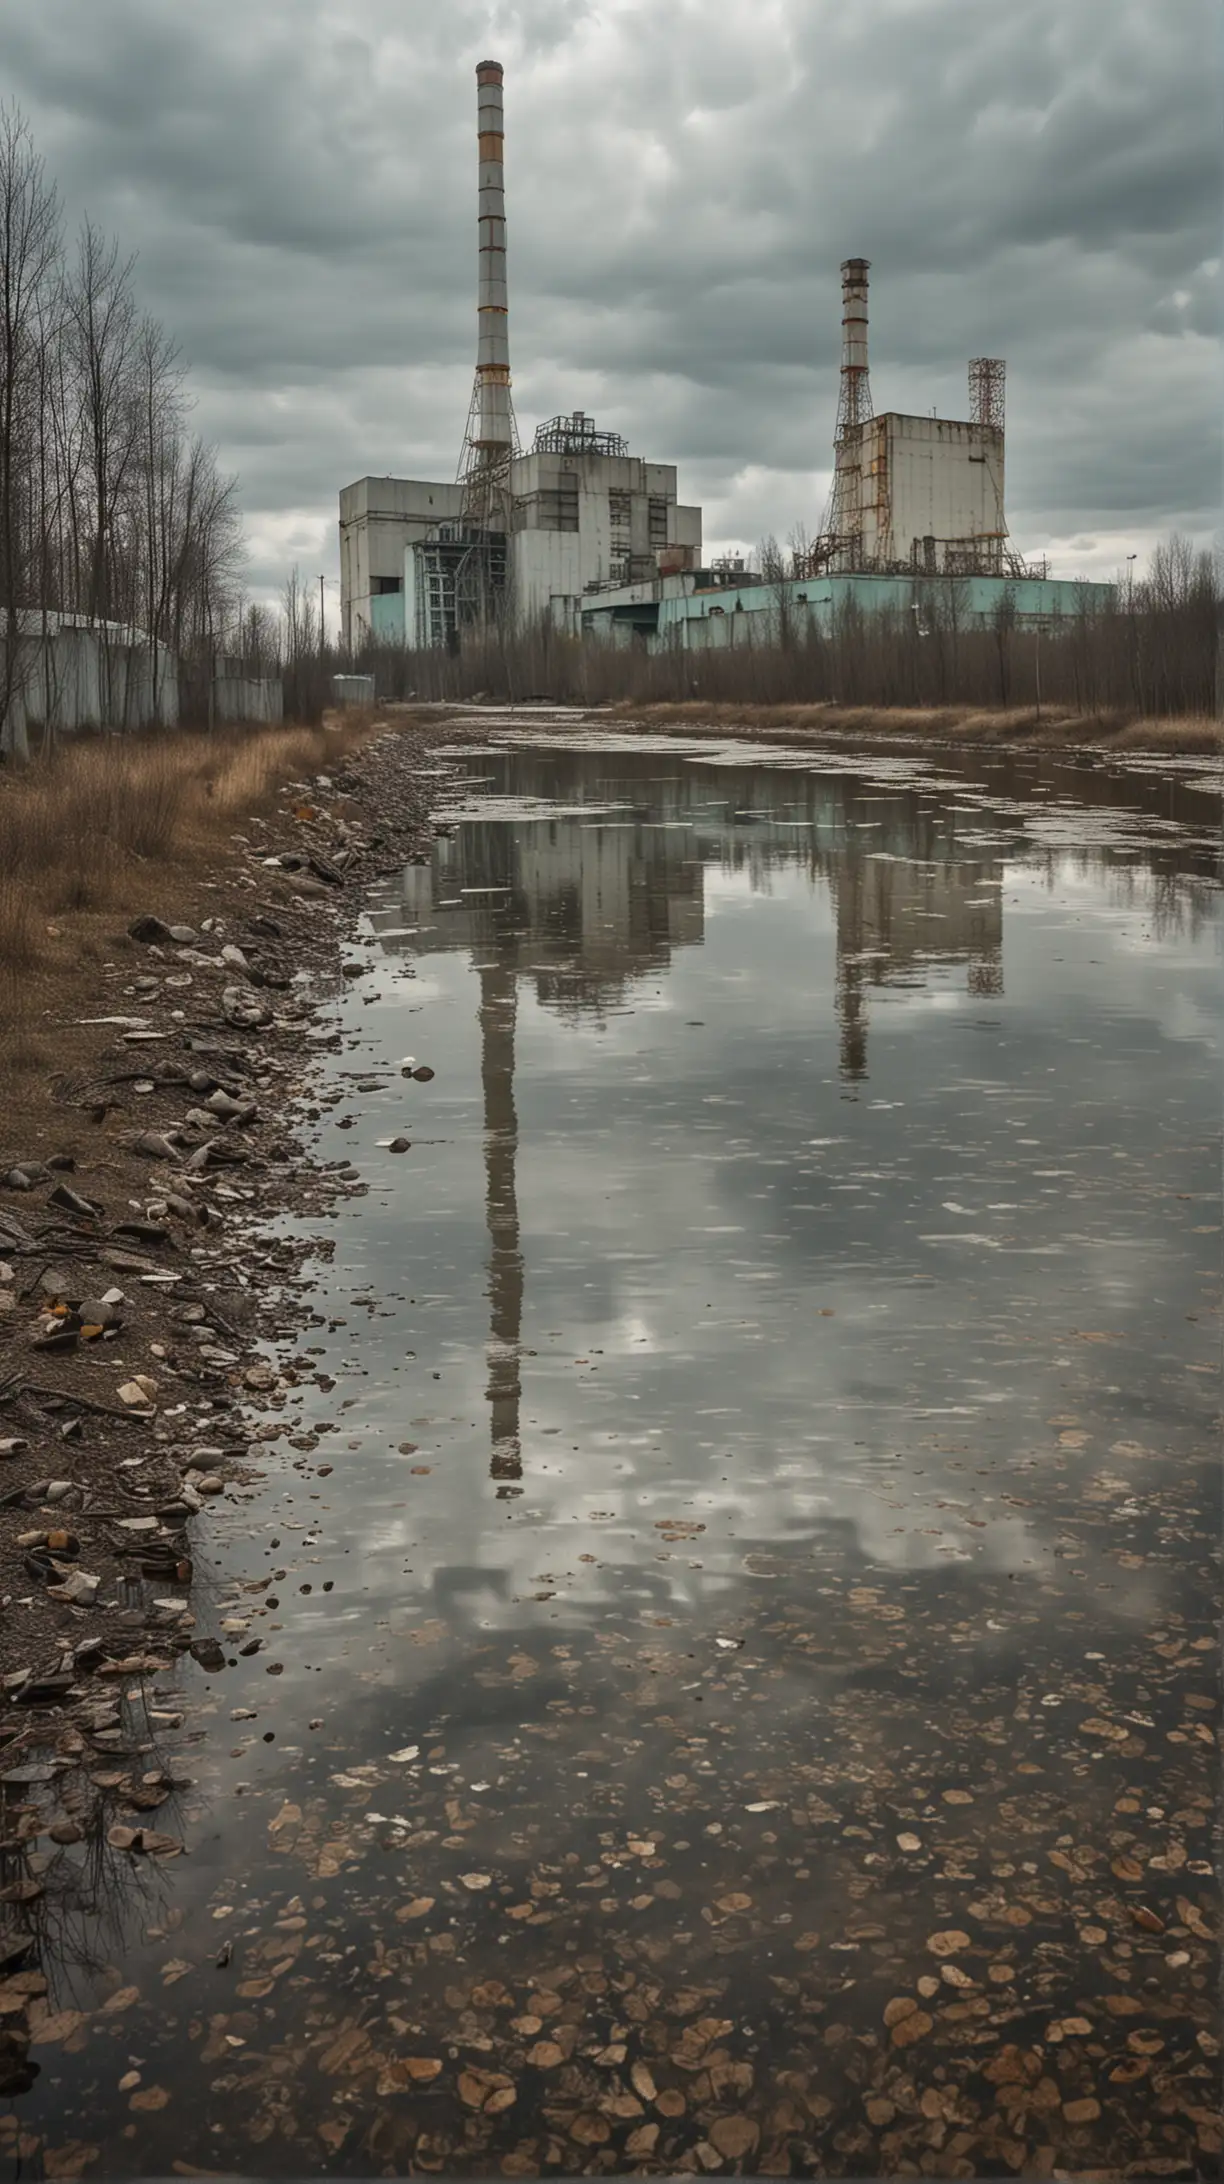 Prelude to Disaster
Image: Show the exterior of the Chernobyl Nuclear Power Plant on a calm, ordinary day.
Description: Set the stage with a serene image of the Chernobyl Nuclear Power Plant, a seemingly peaceful scene before the impending catastrophe.